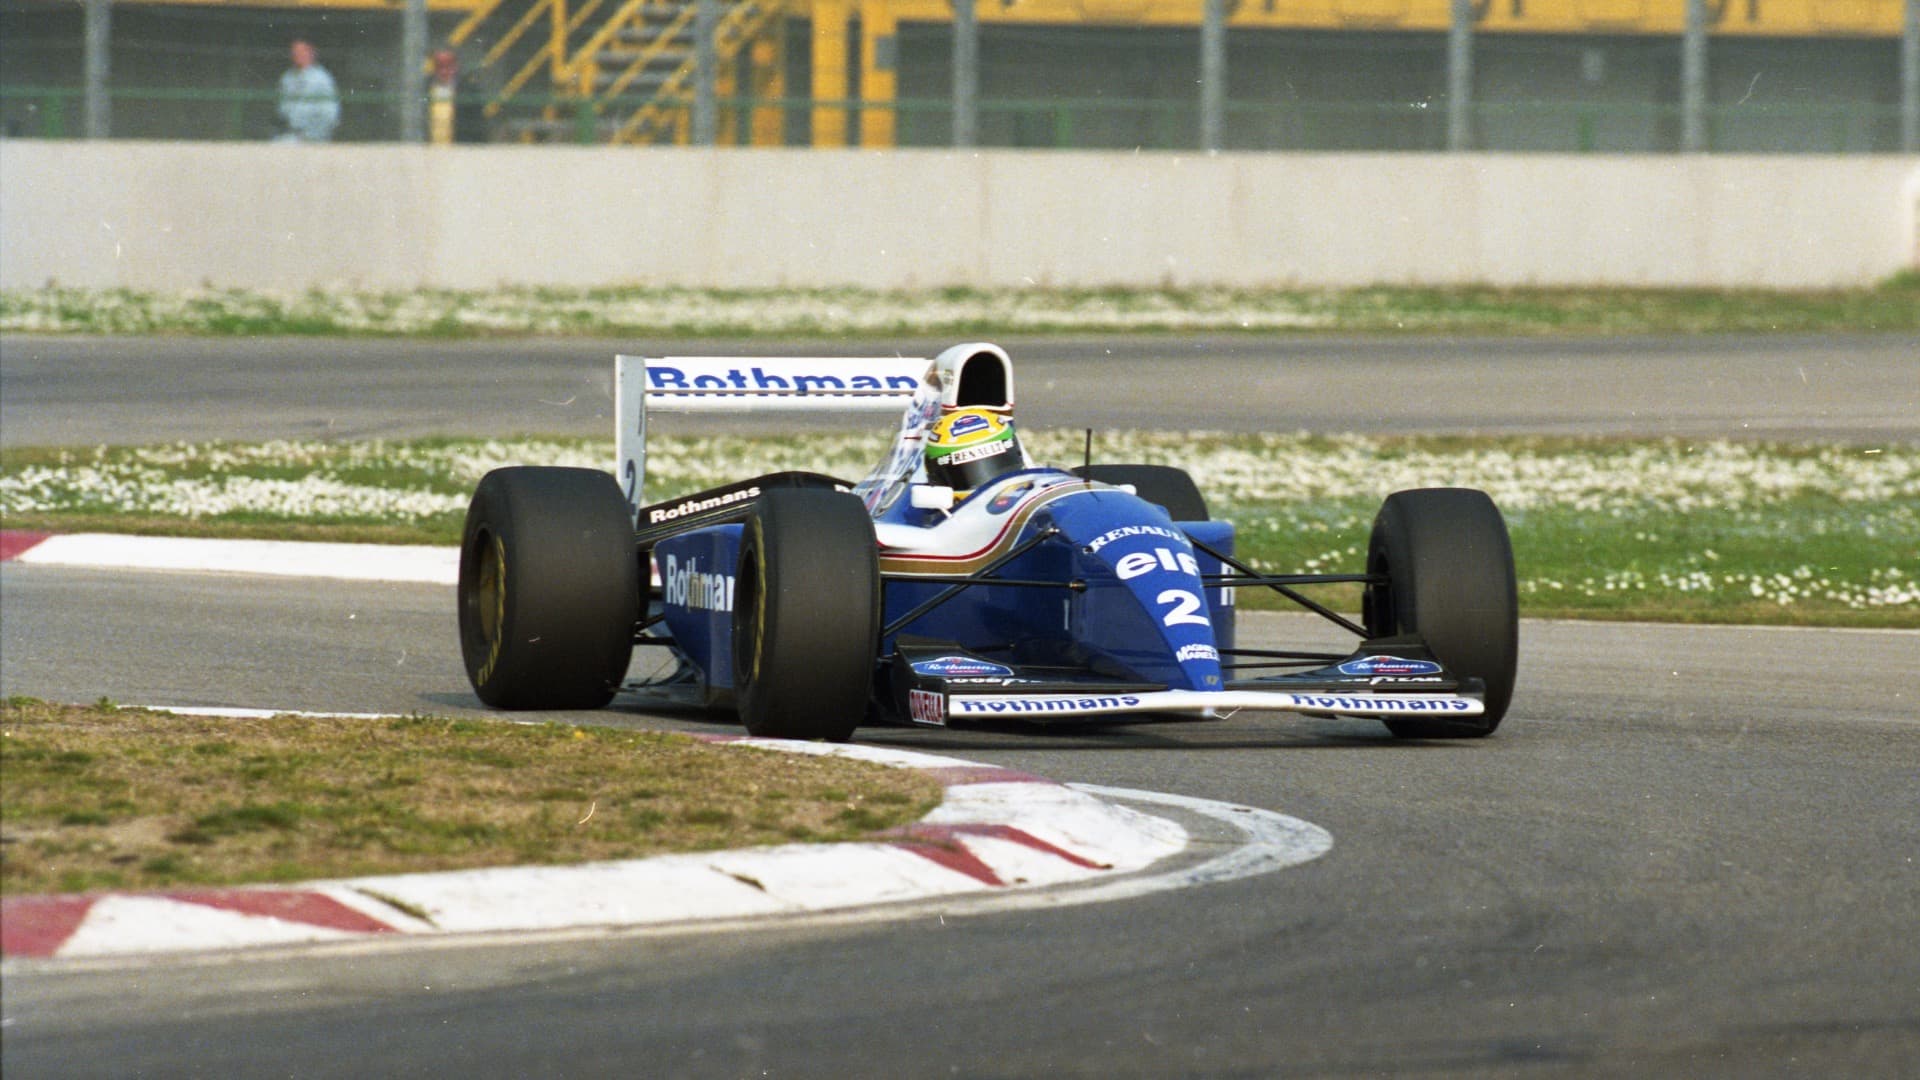 Berger: Imola 1994 was a crazy weekend